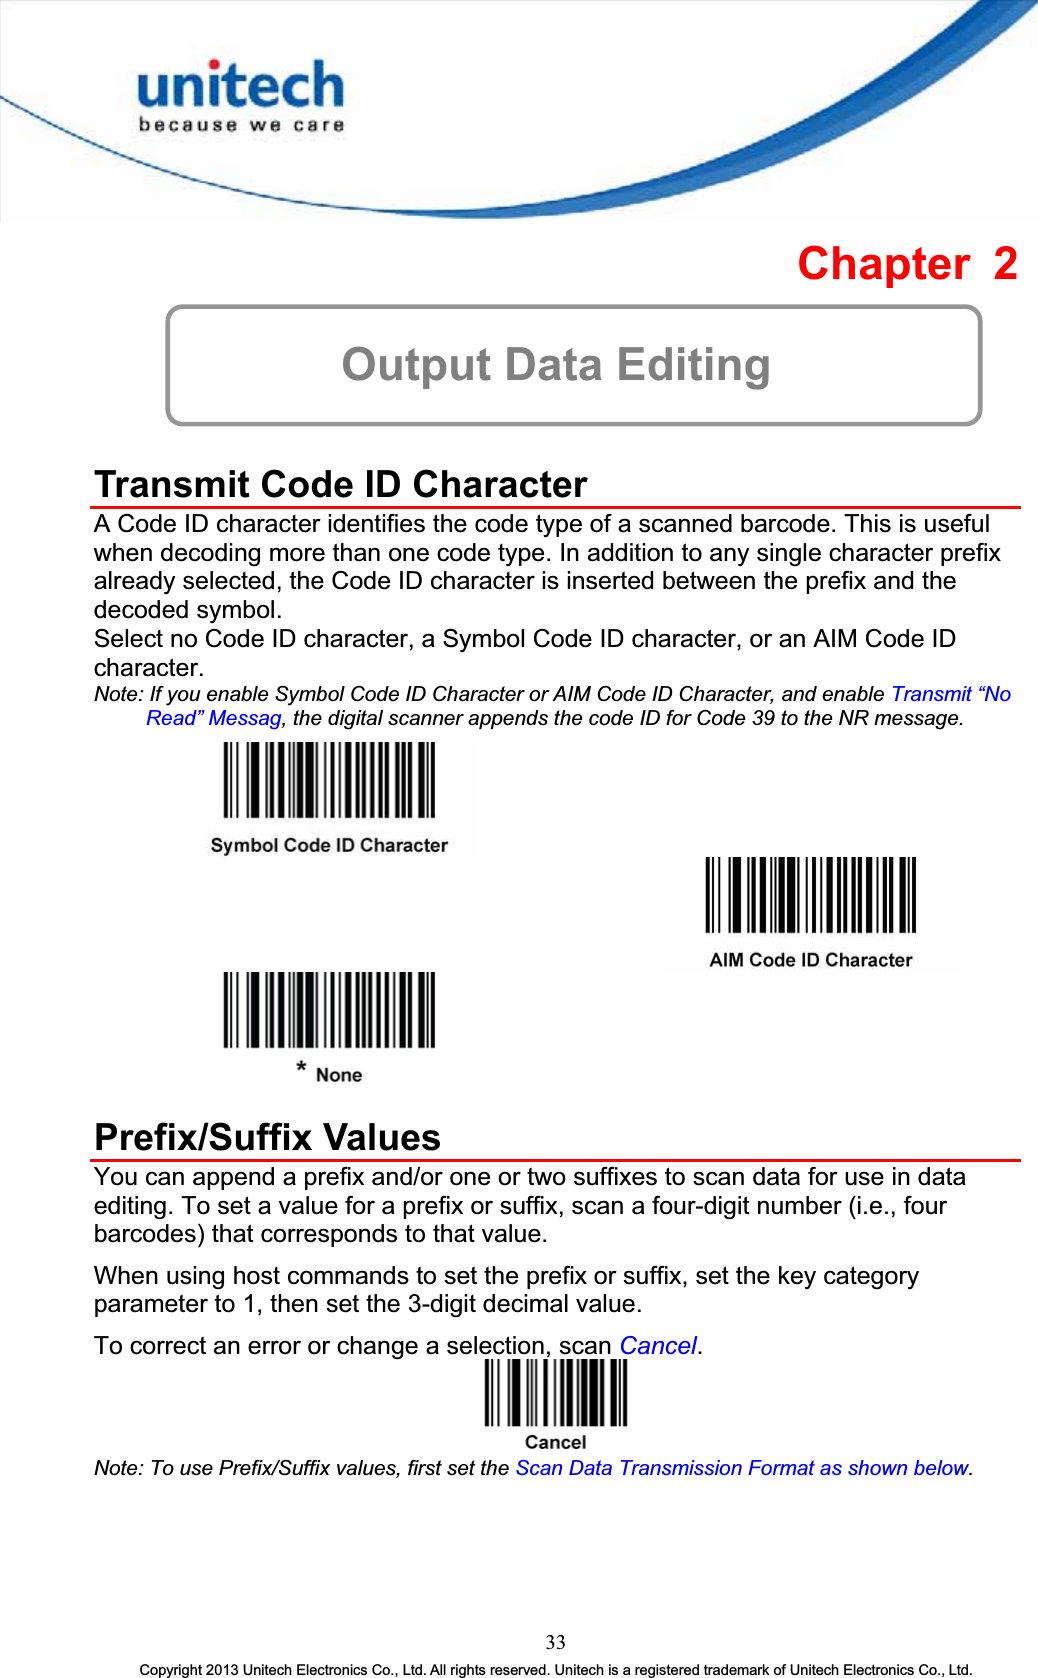 Chapter 2 Output Data Editing Transmit Code ID Character A Code ID character identifies the code type of a scanned barcode. This is useful when decoding more than one code type. In addition to any single character prefix already selected, the Code ID character is inserted between the prefix and the decoded symbol. Select no Code ID character, a Symbol Code ID character, or an AIM Code ID character.Note: If you enable Symbol Code ID Character or AIM Code ID Character, and enable Transmit “No Read” Messag, the digital scanner appends the code ID for Code 39 to the NR message. Prefix/Suffix Values You can append a prefix and/or one or two suffixes to scan data for use in data editing. To set a value for a prefix or suffix, scan a four-digit number (i.e., four barcodes) that corresponds to that value. When using host commands to set the prefix or suffix, set the key category parameter to 1, then set the 3-digit decimal value. To correct an error or change a selection, scan Cancel.Note: To use Prefix/Suffix values, first set the Scan Data Transmission Format as shown below.33Copyright 2013 Unitech Electronics Co., Ltd. All rights reserved. Unitech is a registered trademark of Unitech Electronics Co., Ltd. 